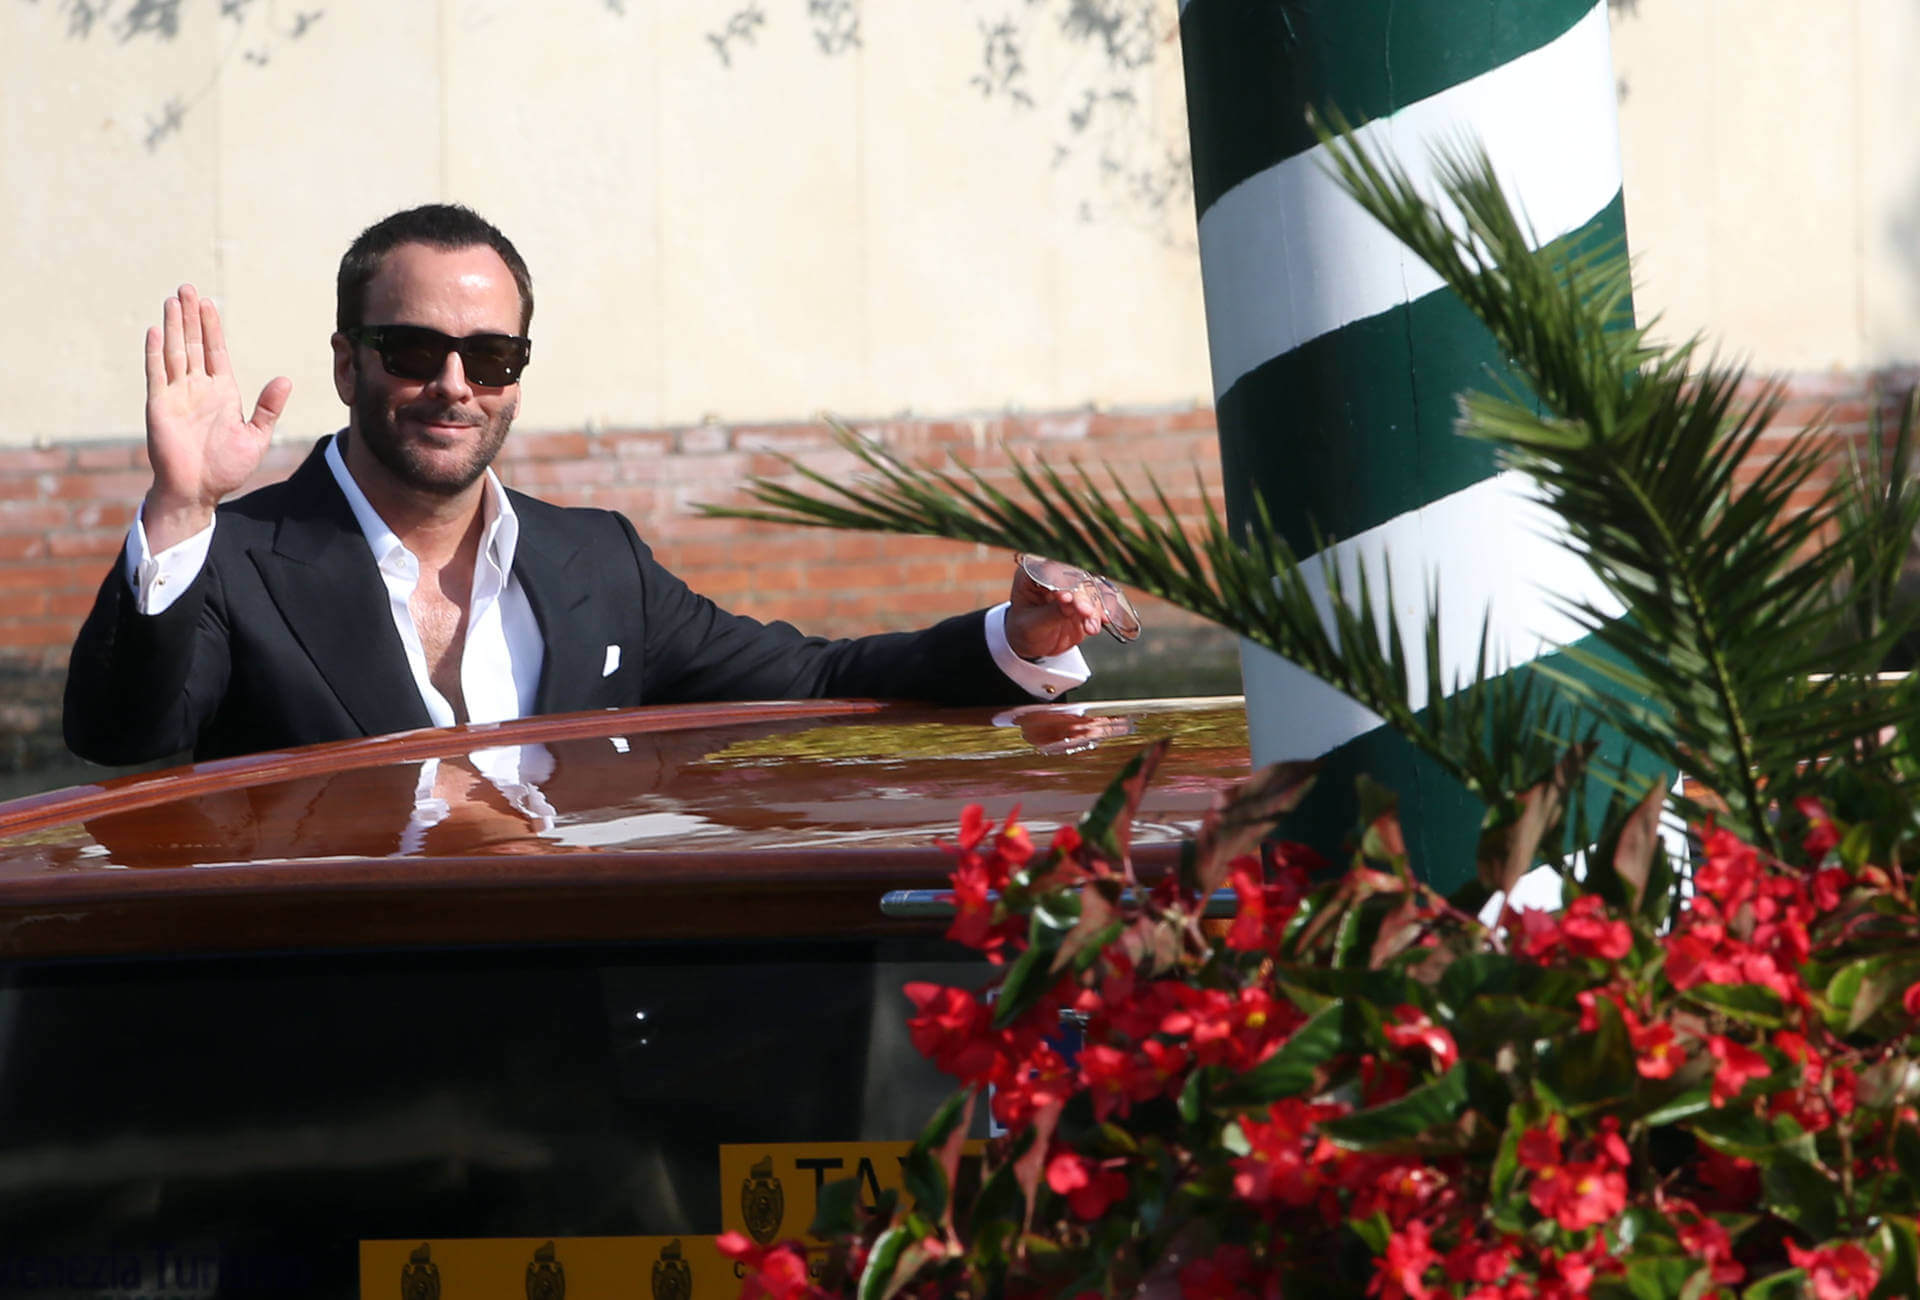 Tom Ford: “A watch should be discreet 